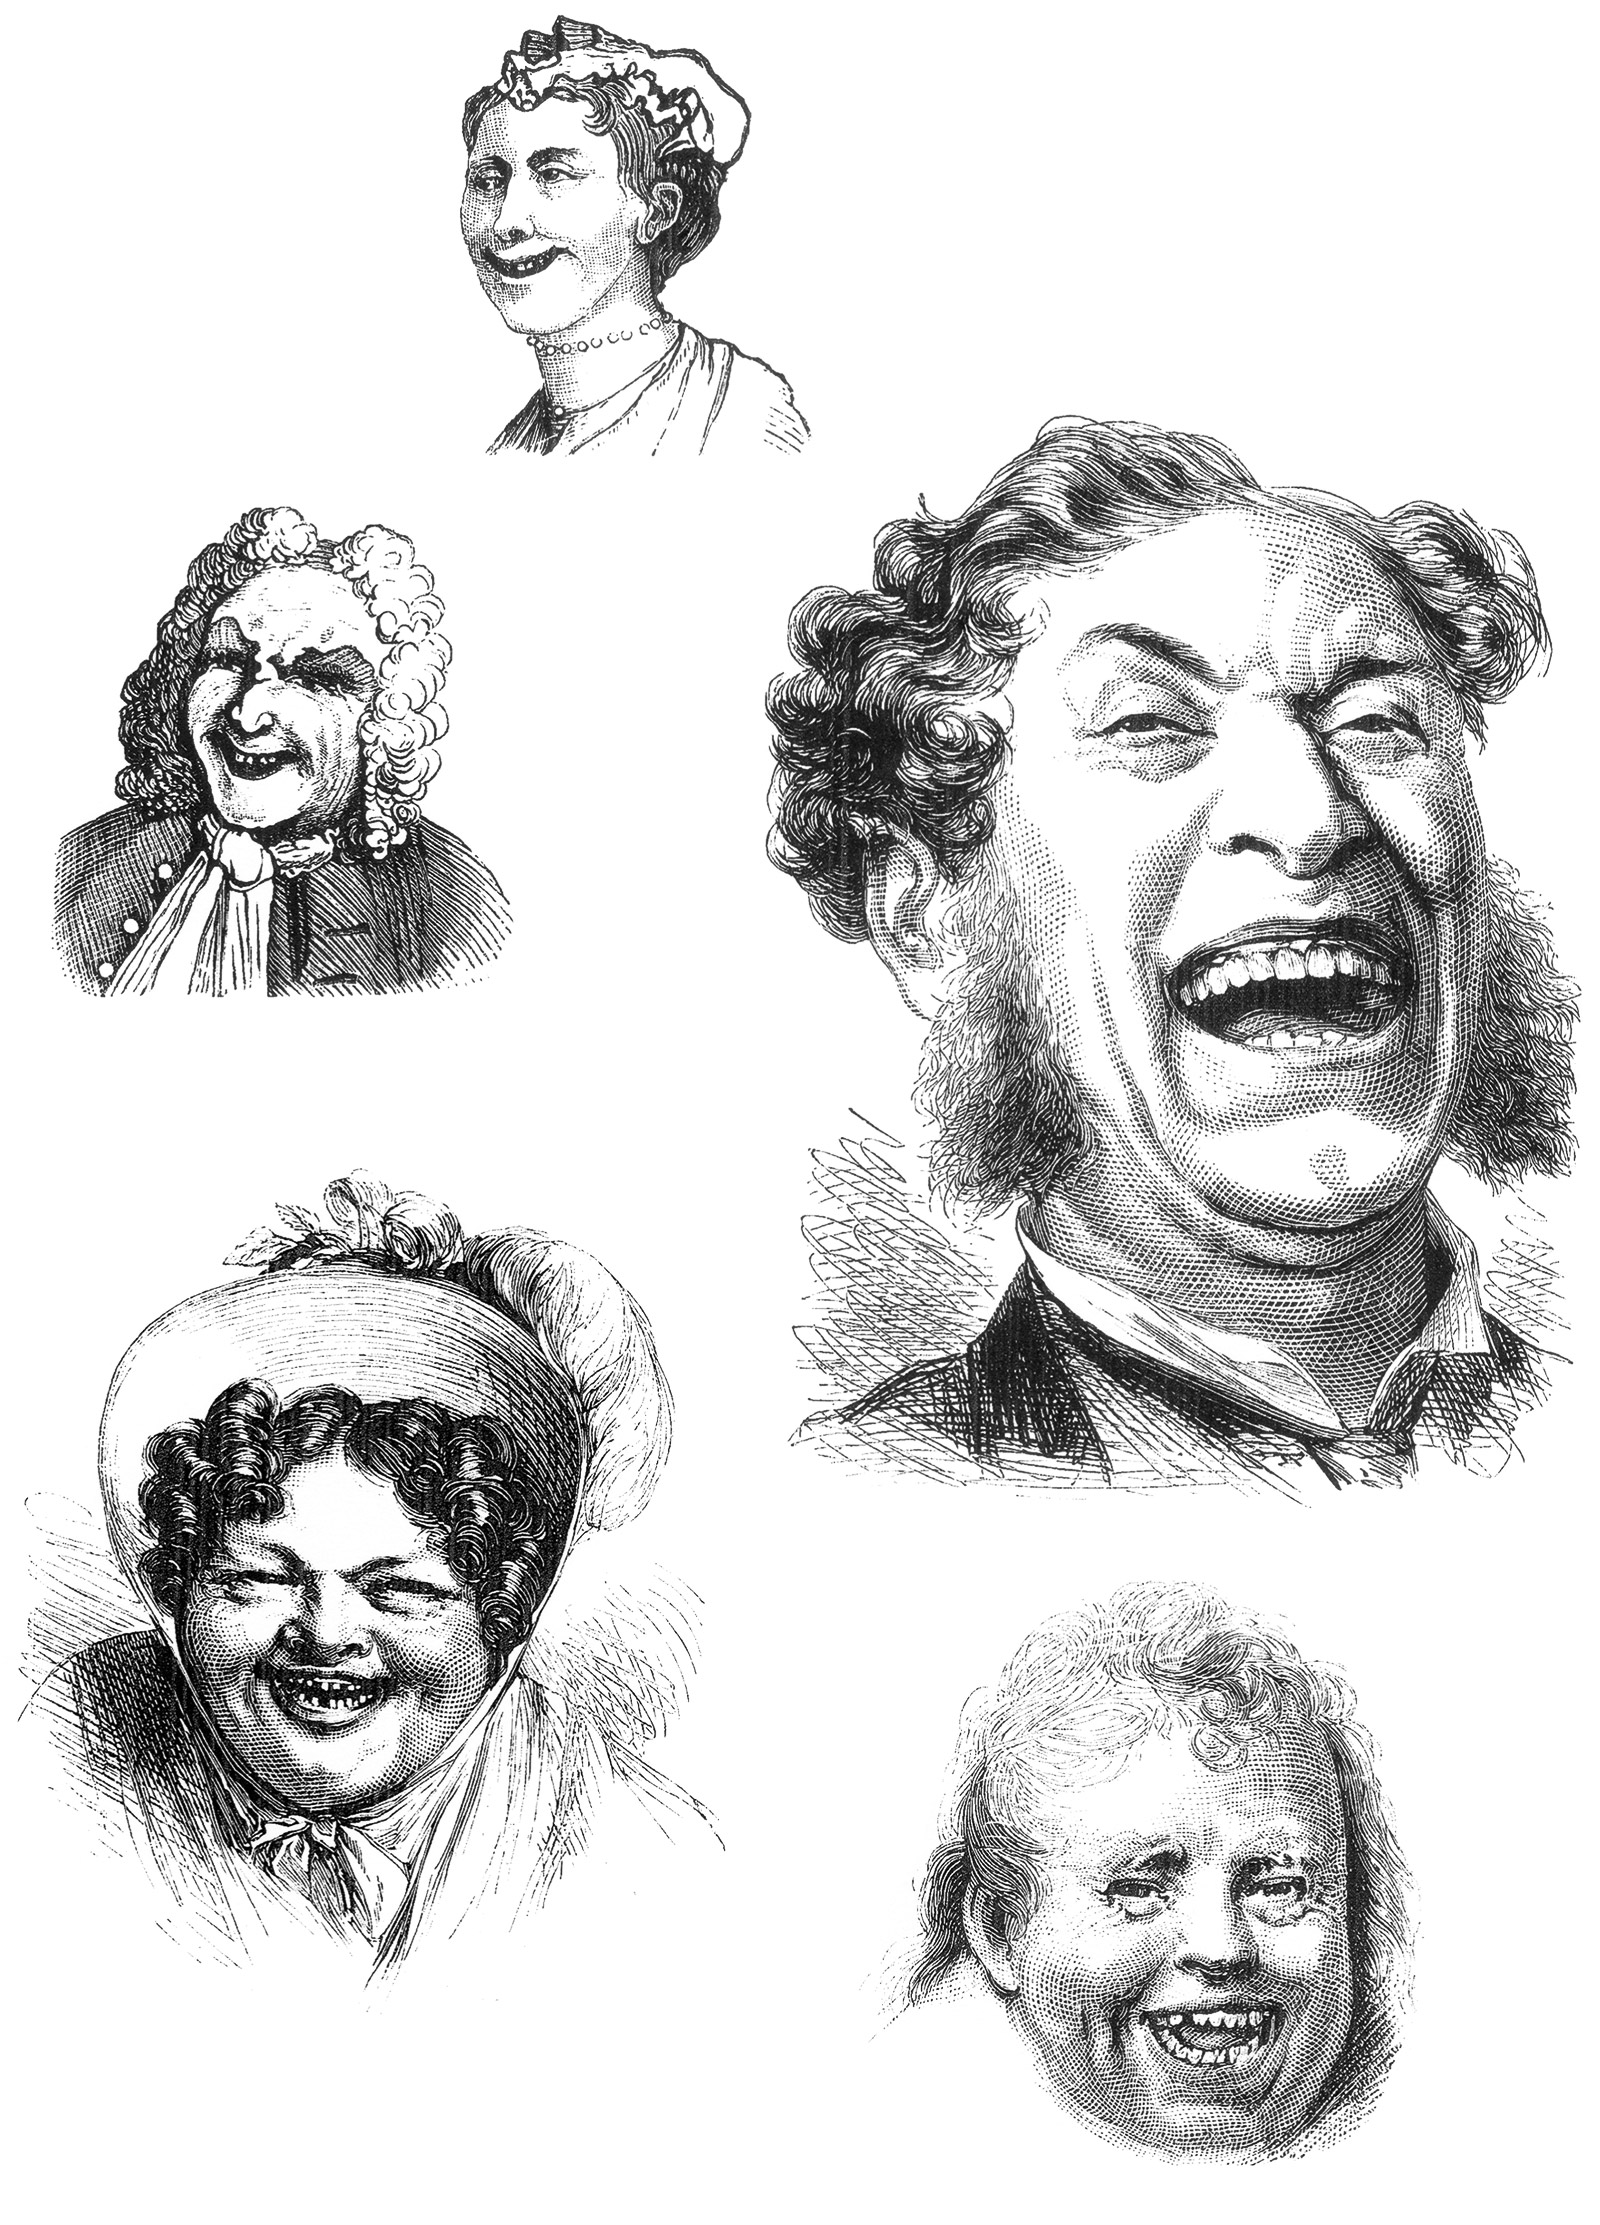 Illustrations of five laughing faces from George Vesey’s 1877 work “The Philosophy of Laughter and Smiling.” They depict “The Giggling Laugh, excited by Boisterous Fun and Nonsense,” “The Obstreperous Laugh, instigated by Practical Jokes or Extreme Absurdities,” “The Hearty Laugh of the Gentler Sex,” “The Stentorian Laugh of the Stronger Sex,” and “The Superlative Laugh, or Highest Degree of Laughter.” 